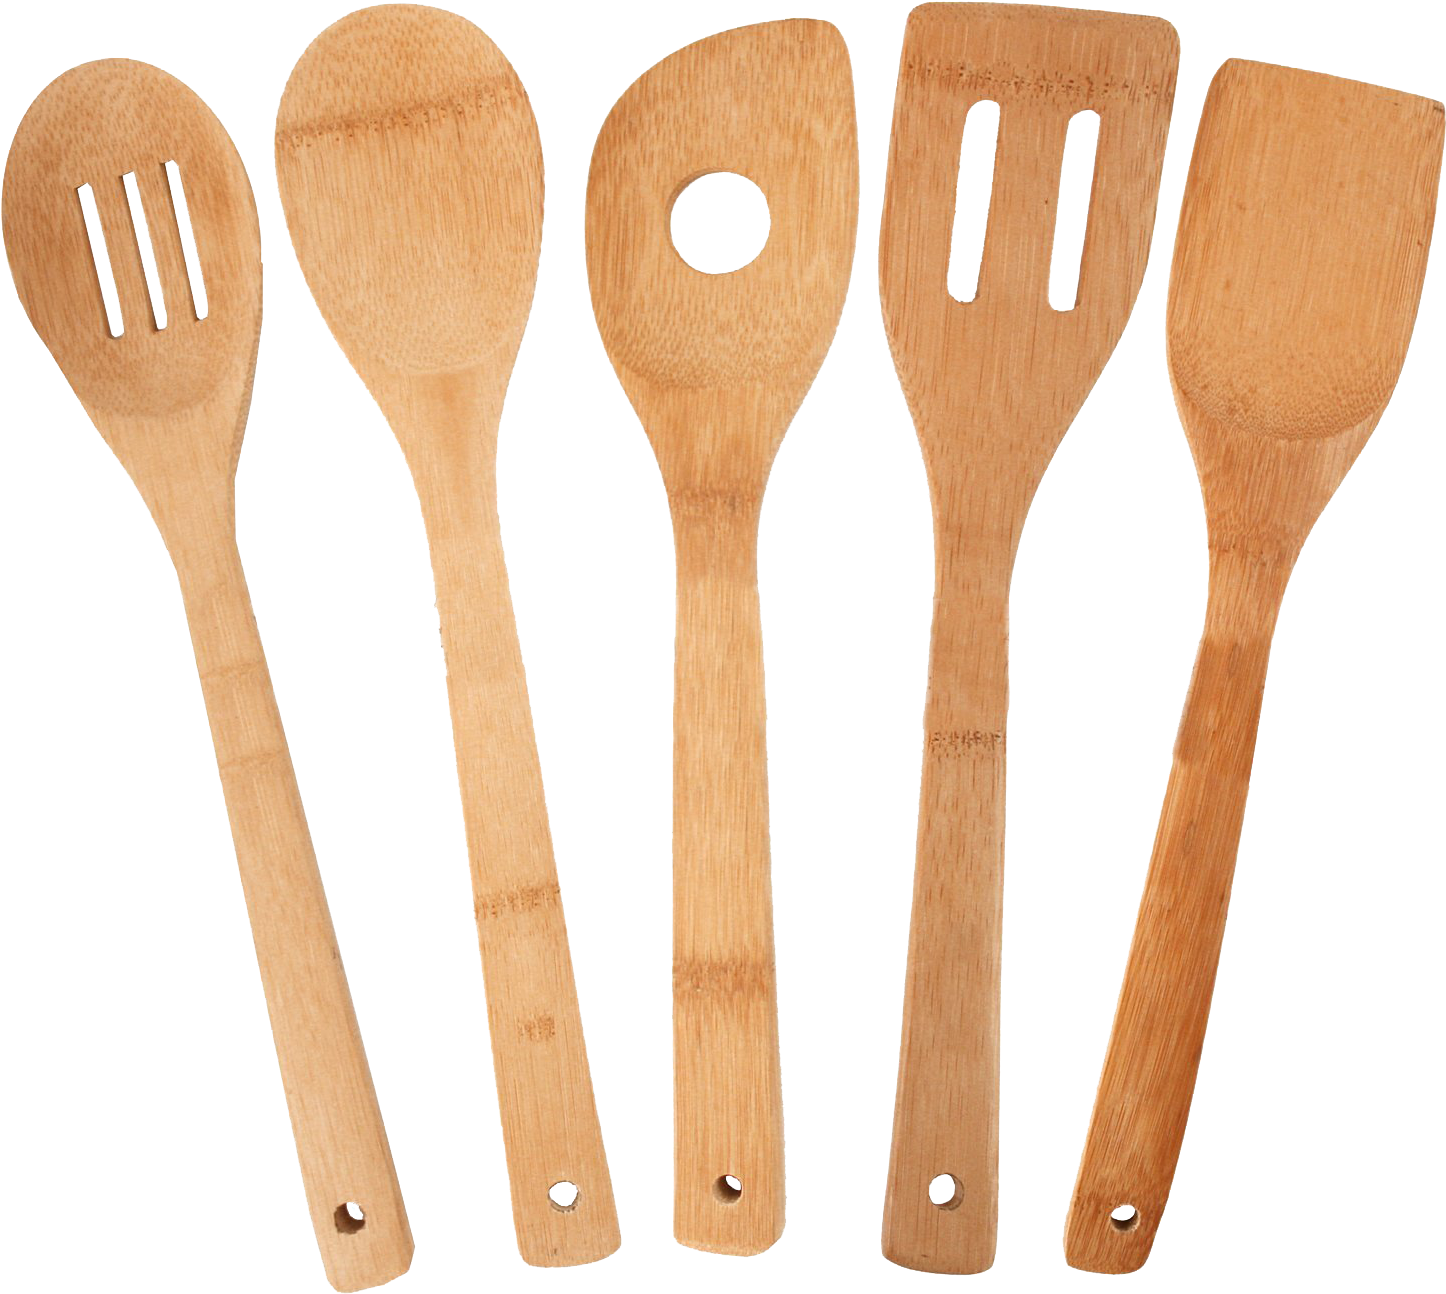 A Group Of Wooden Spoons